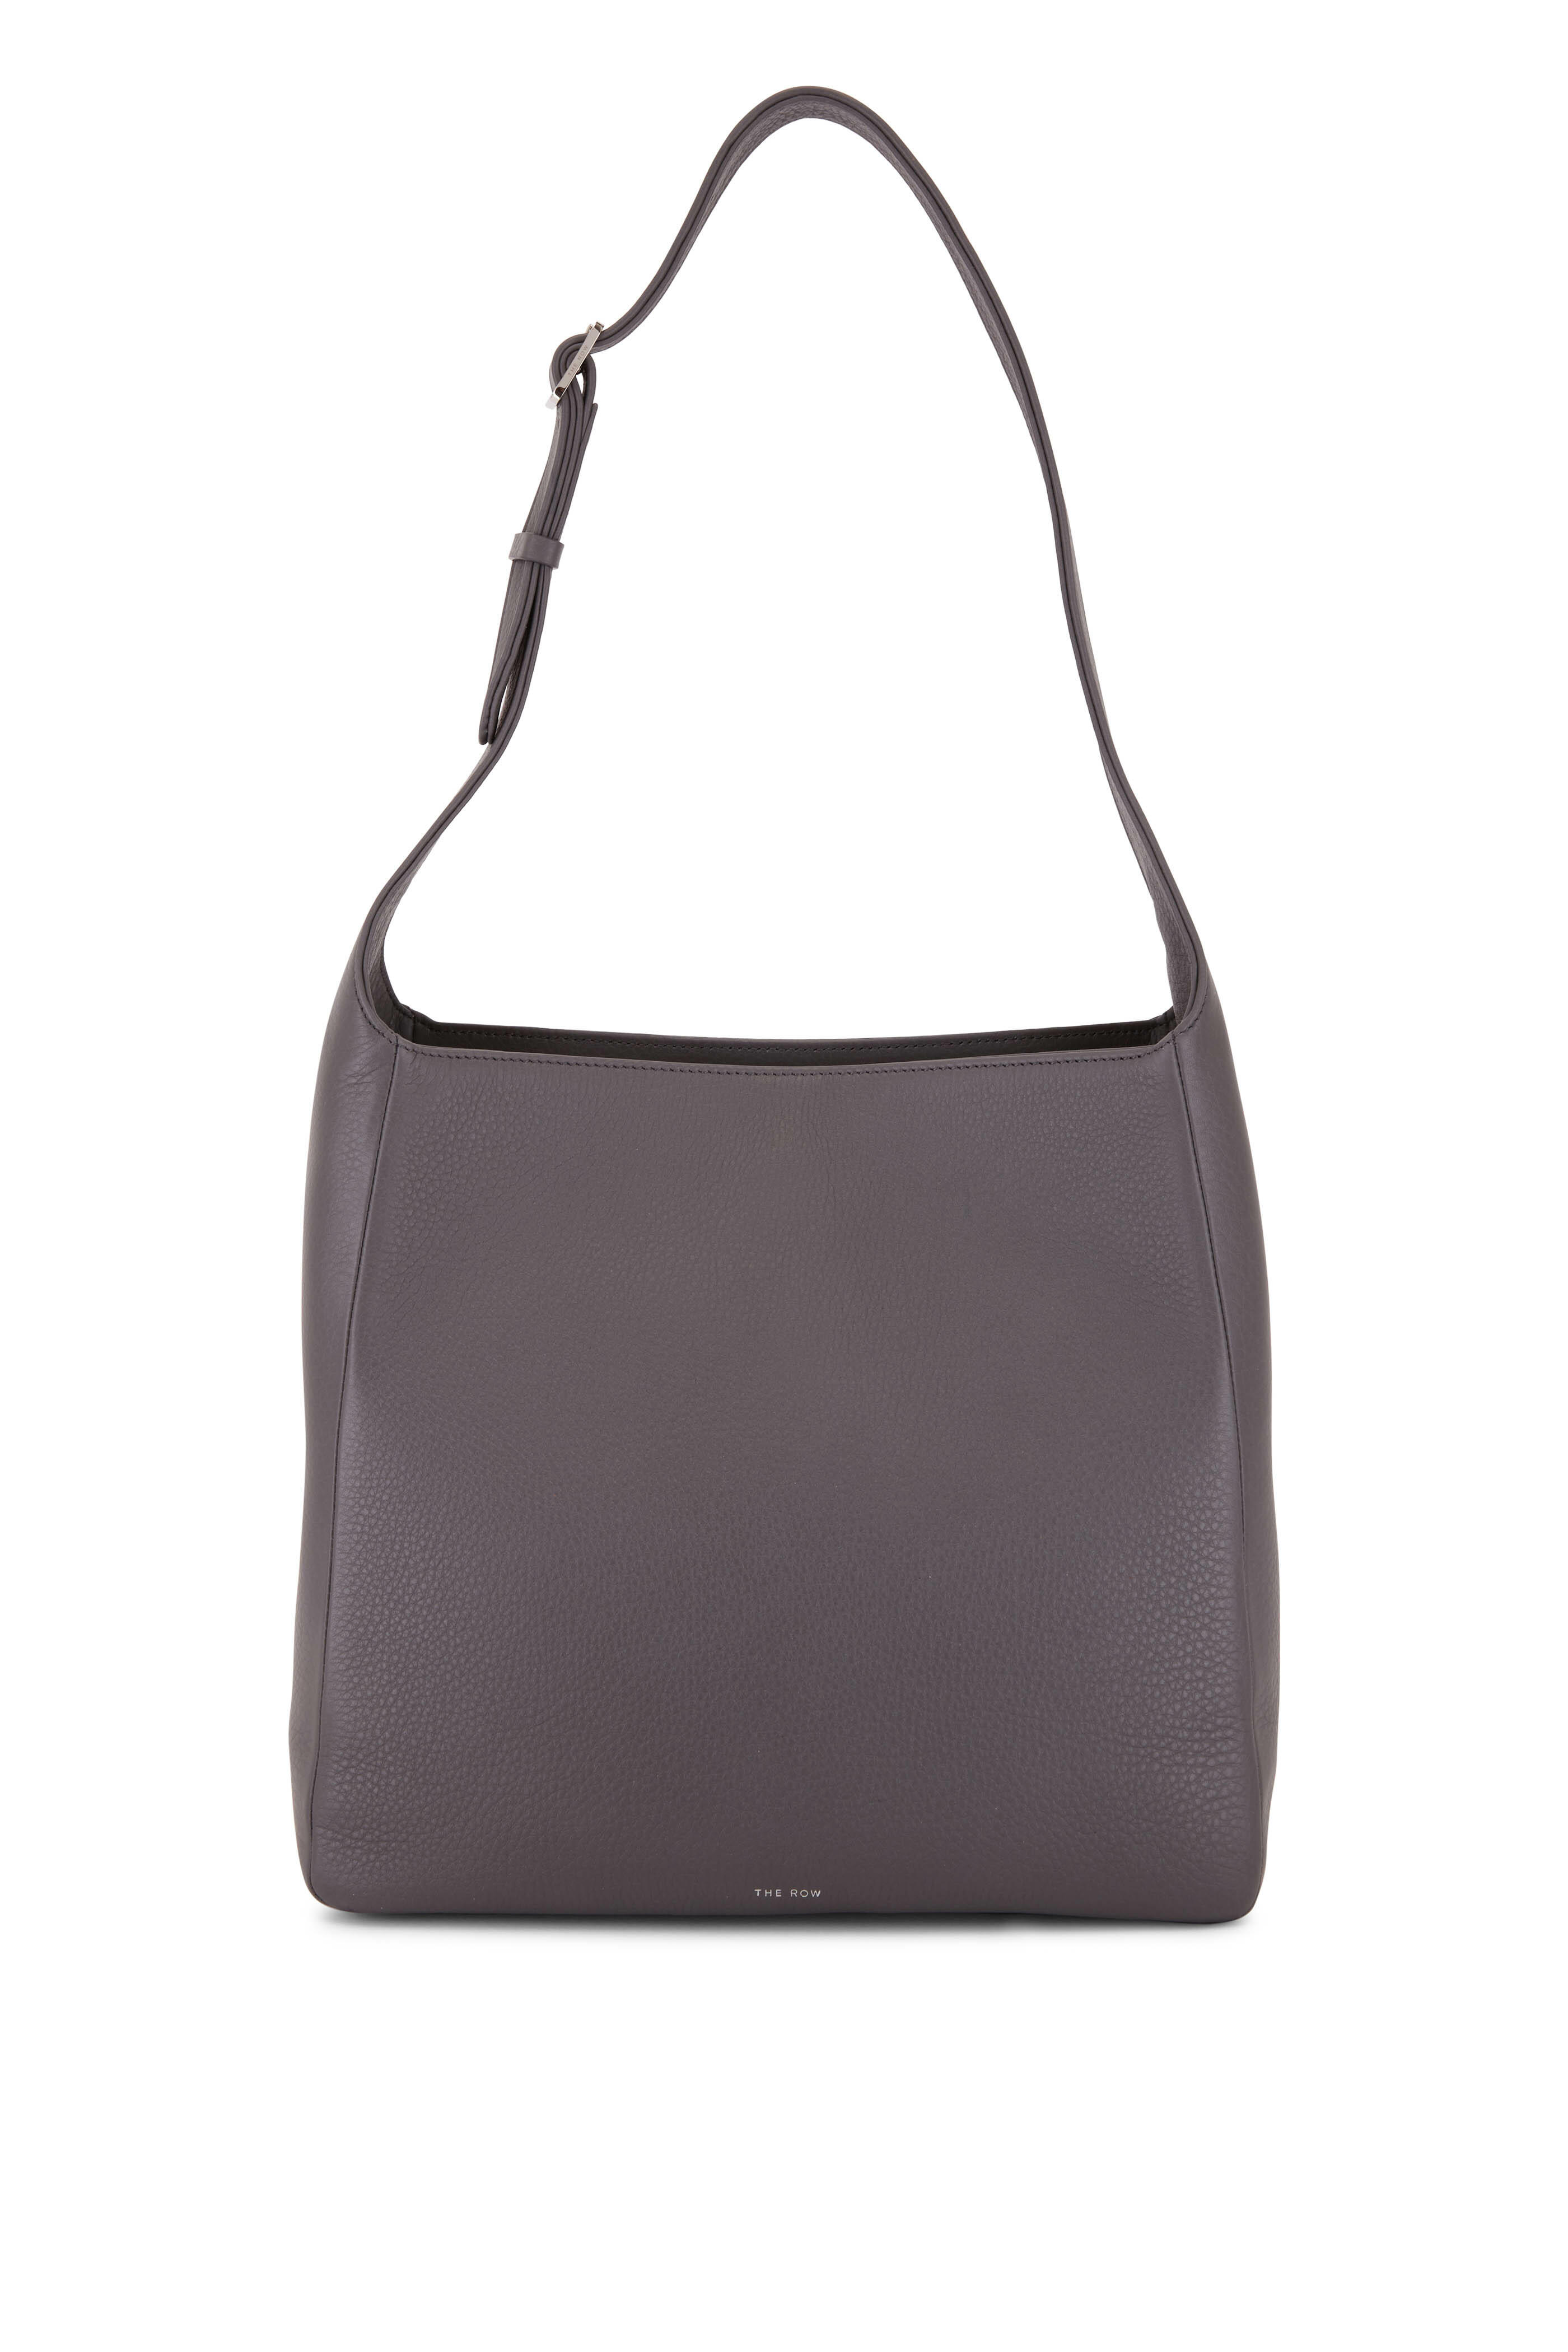 THE ROW Miguel leather shoulder bag